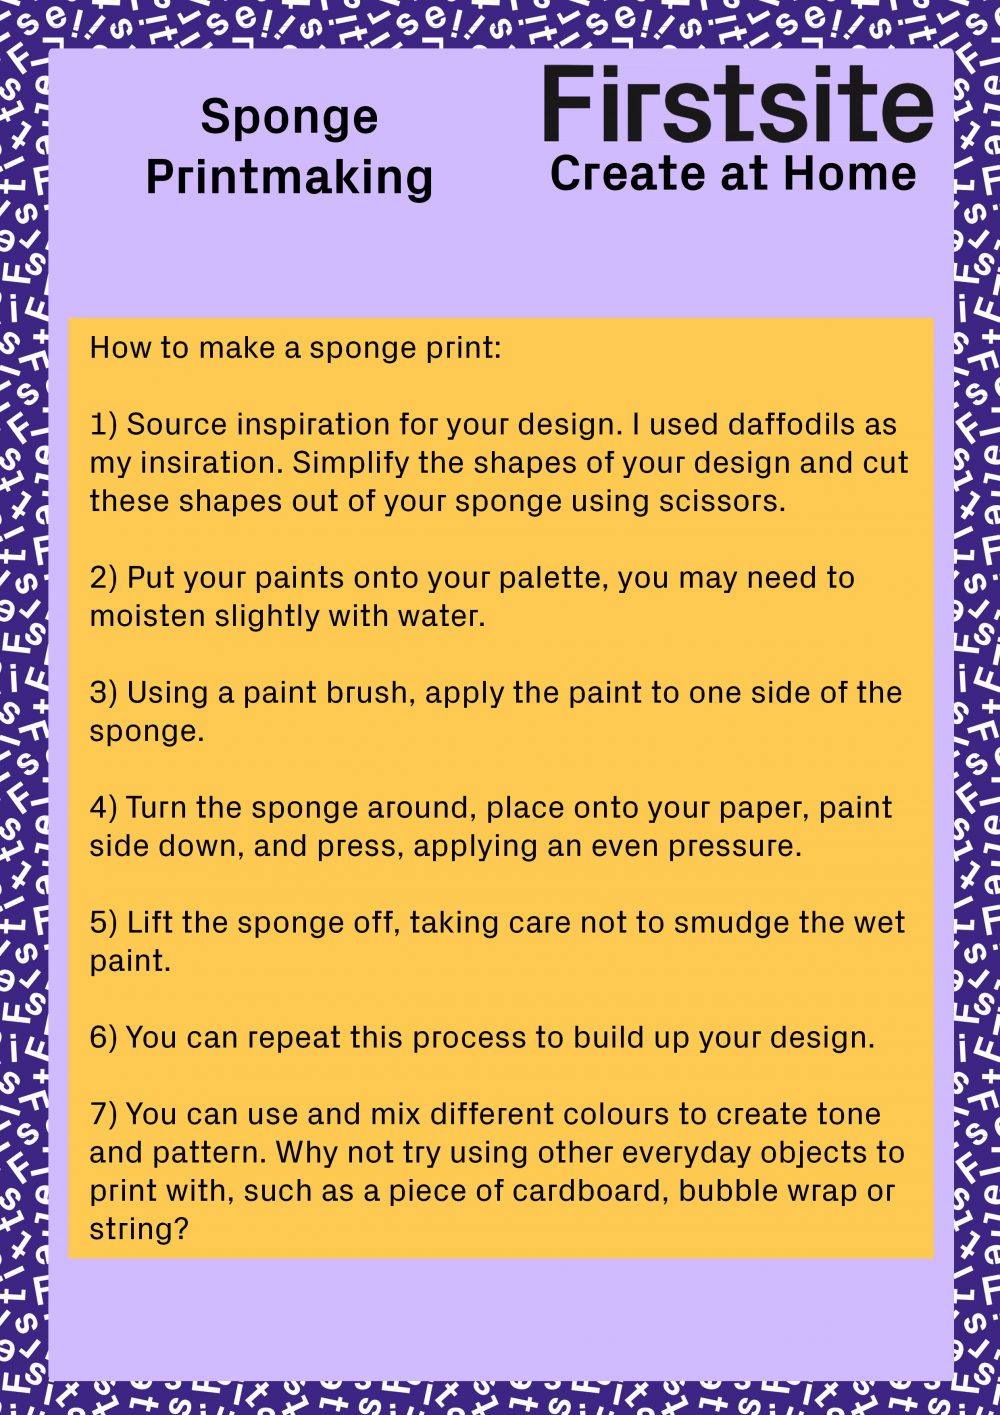 Firstsite Create at Home Sponge Printing Instructions pg 2 of 2